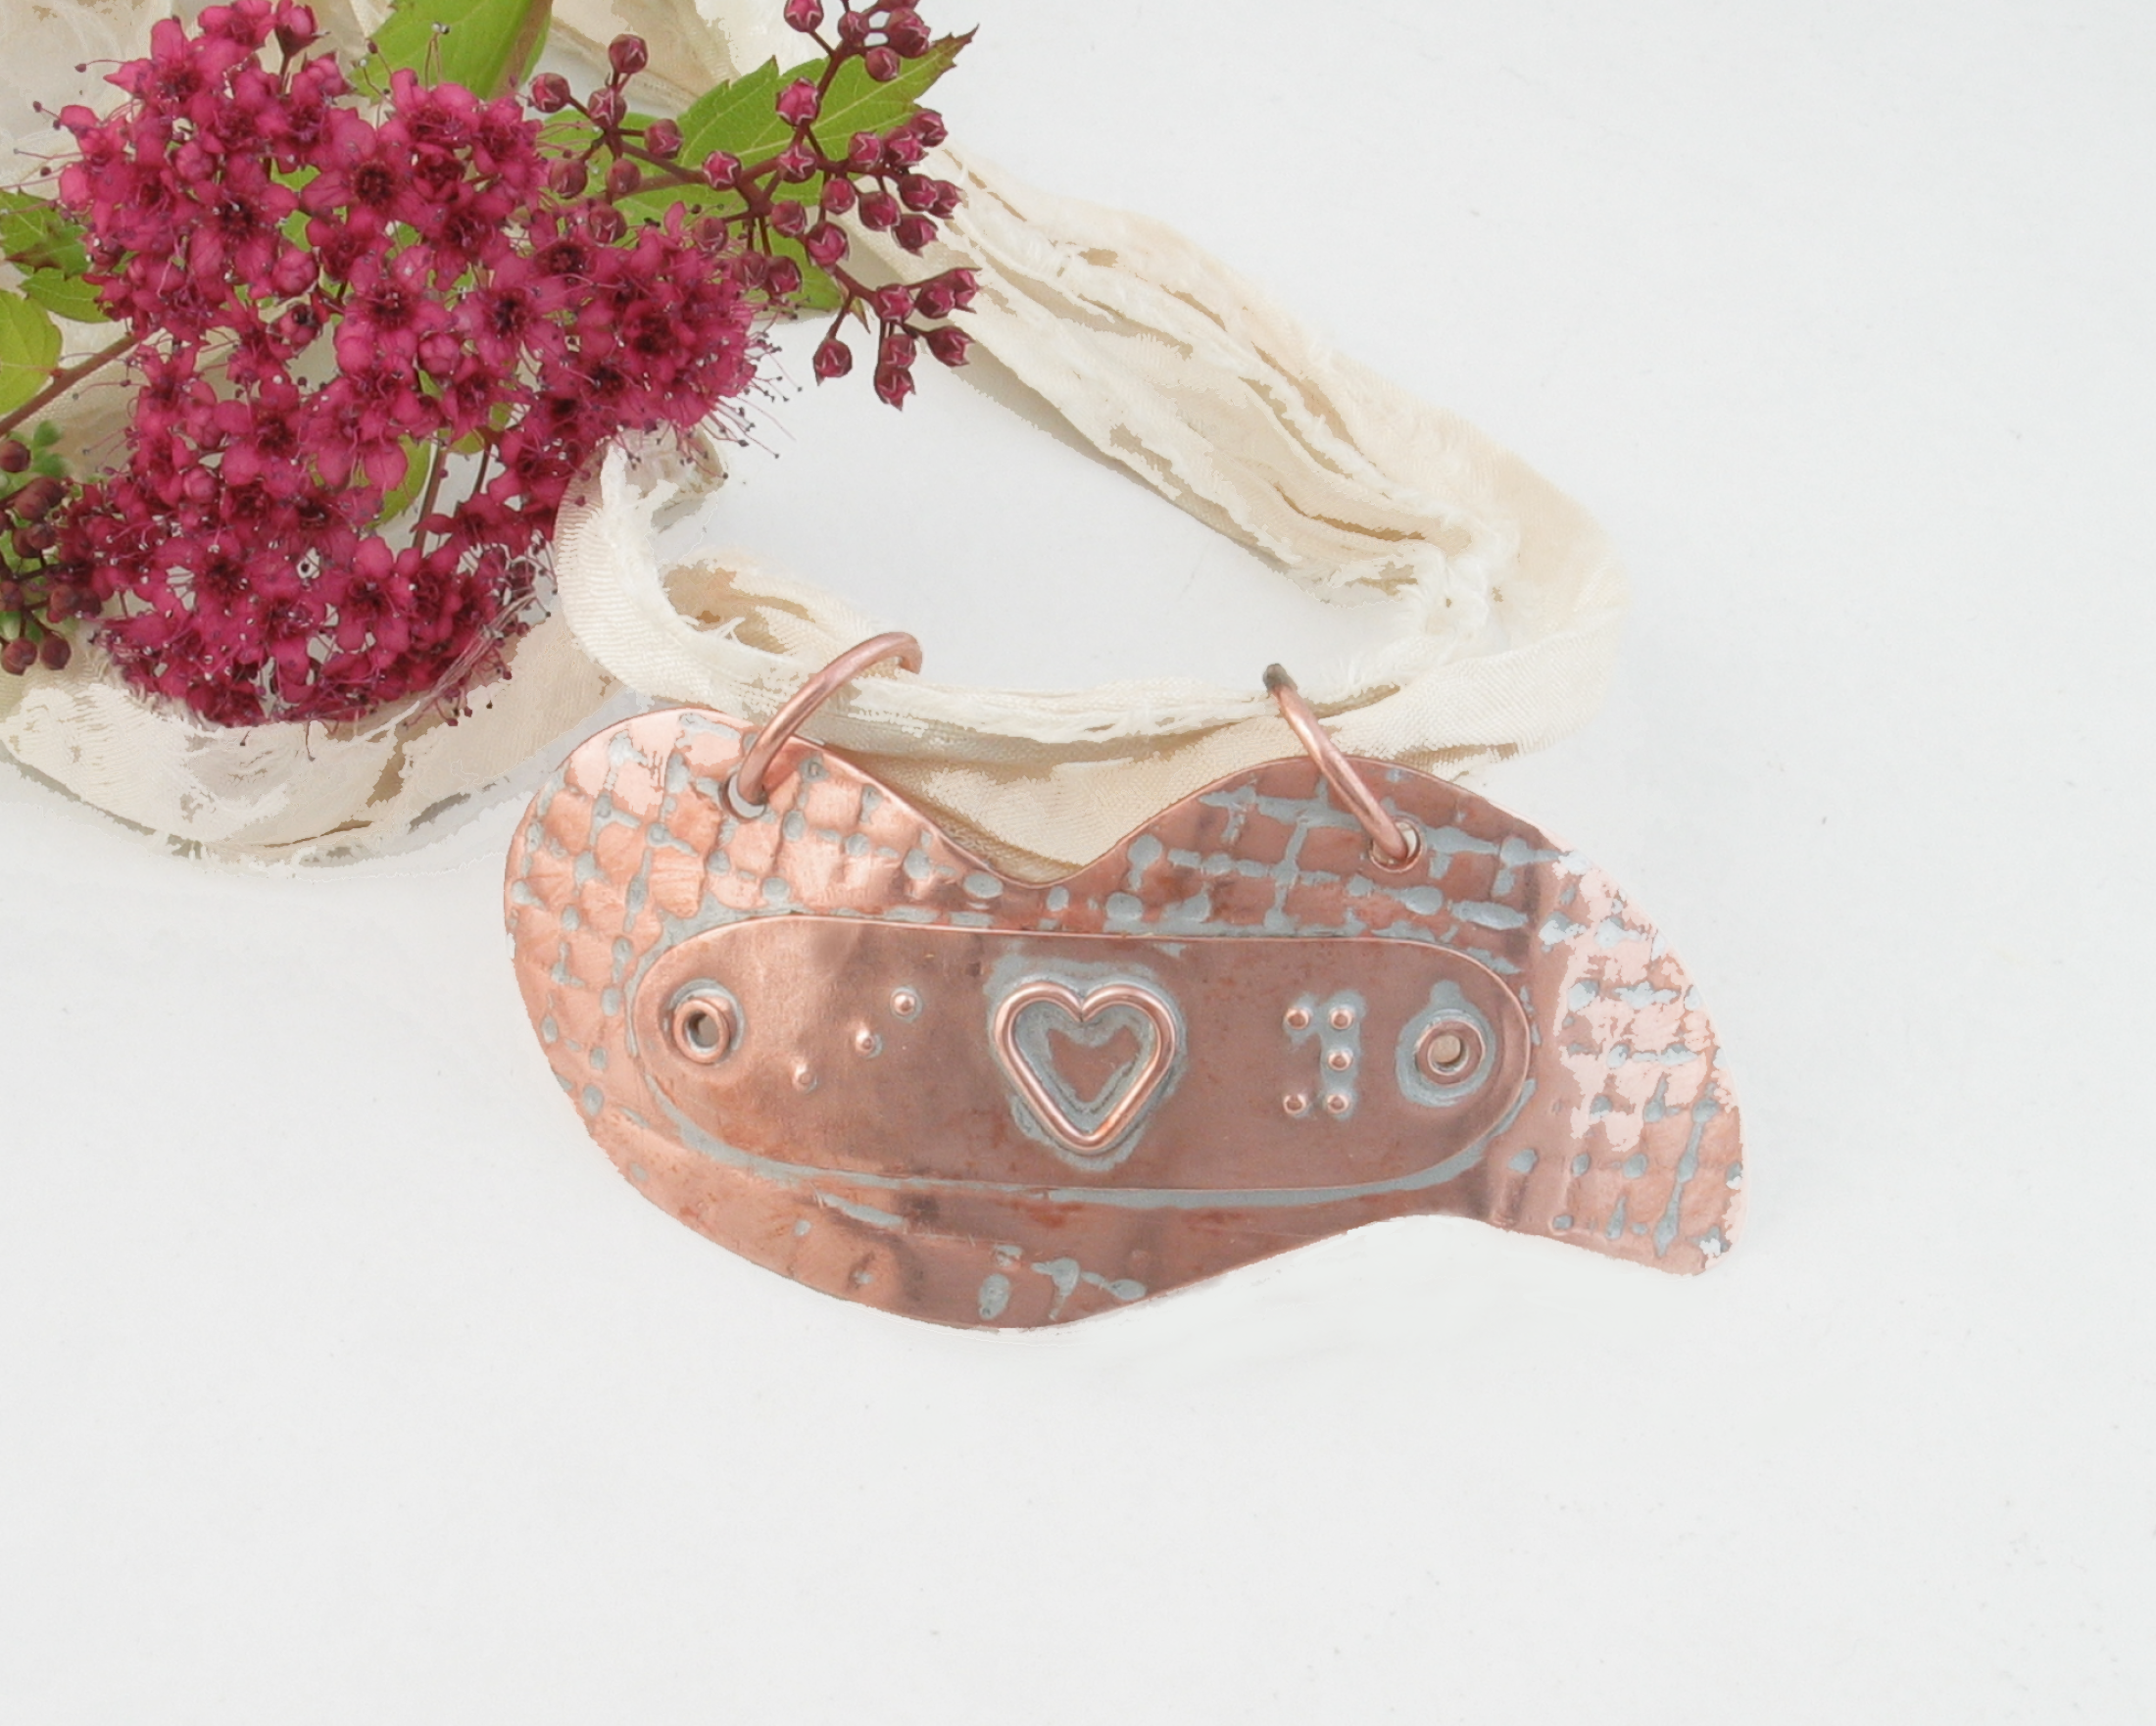 Copper Braille Pendant Medallion Necklace that says I Love You with a tactile heart for the word love.